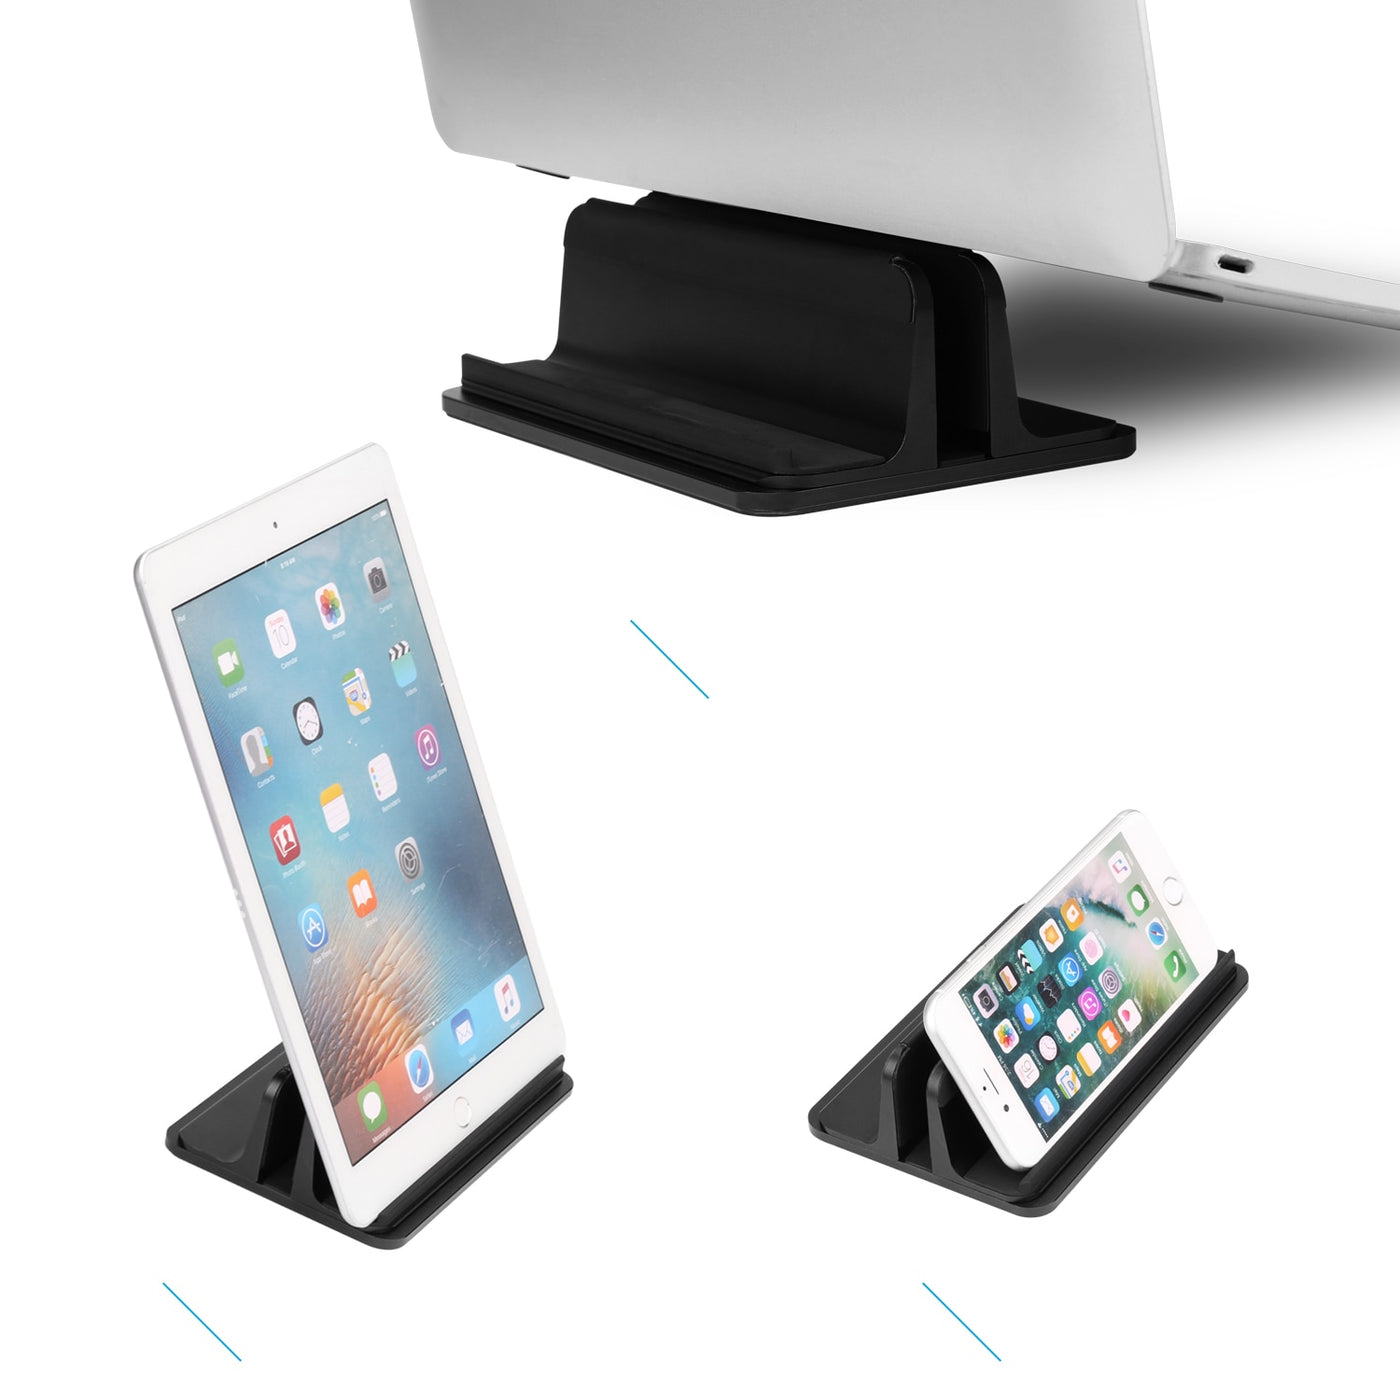 Vertical Laptop Stand for Macbook Air Pro 13 / 15